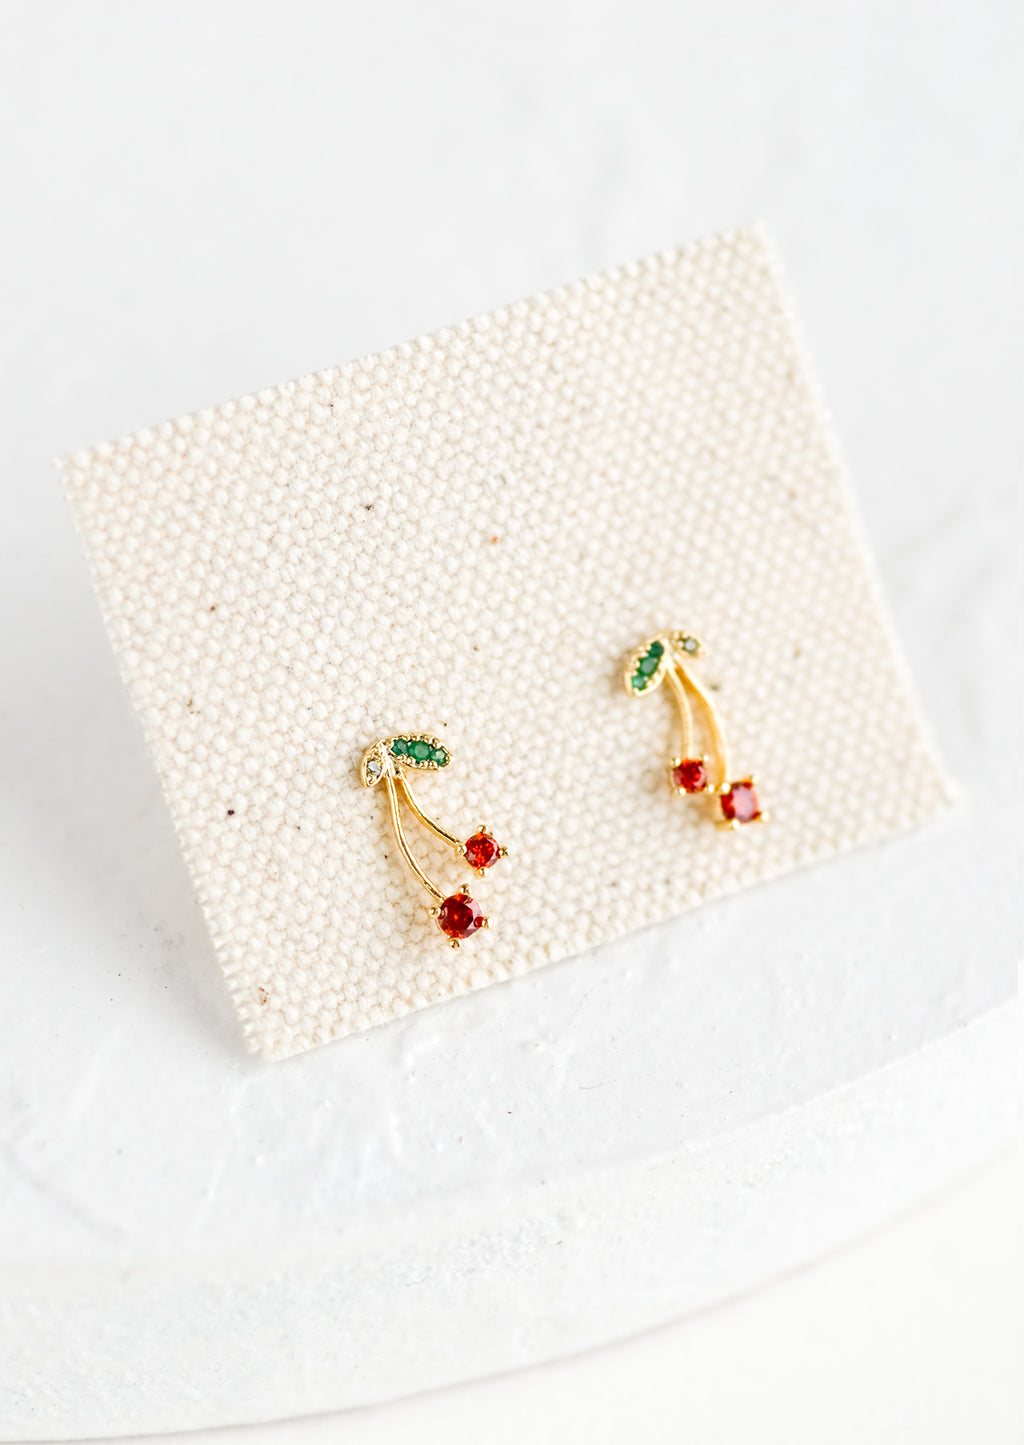 2: A pair of gold stud earrings on canvas square.